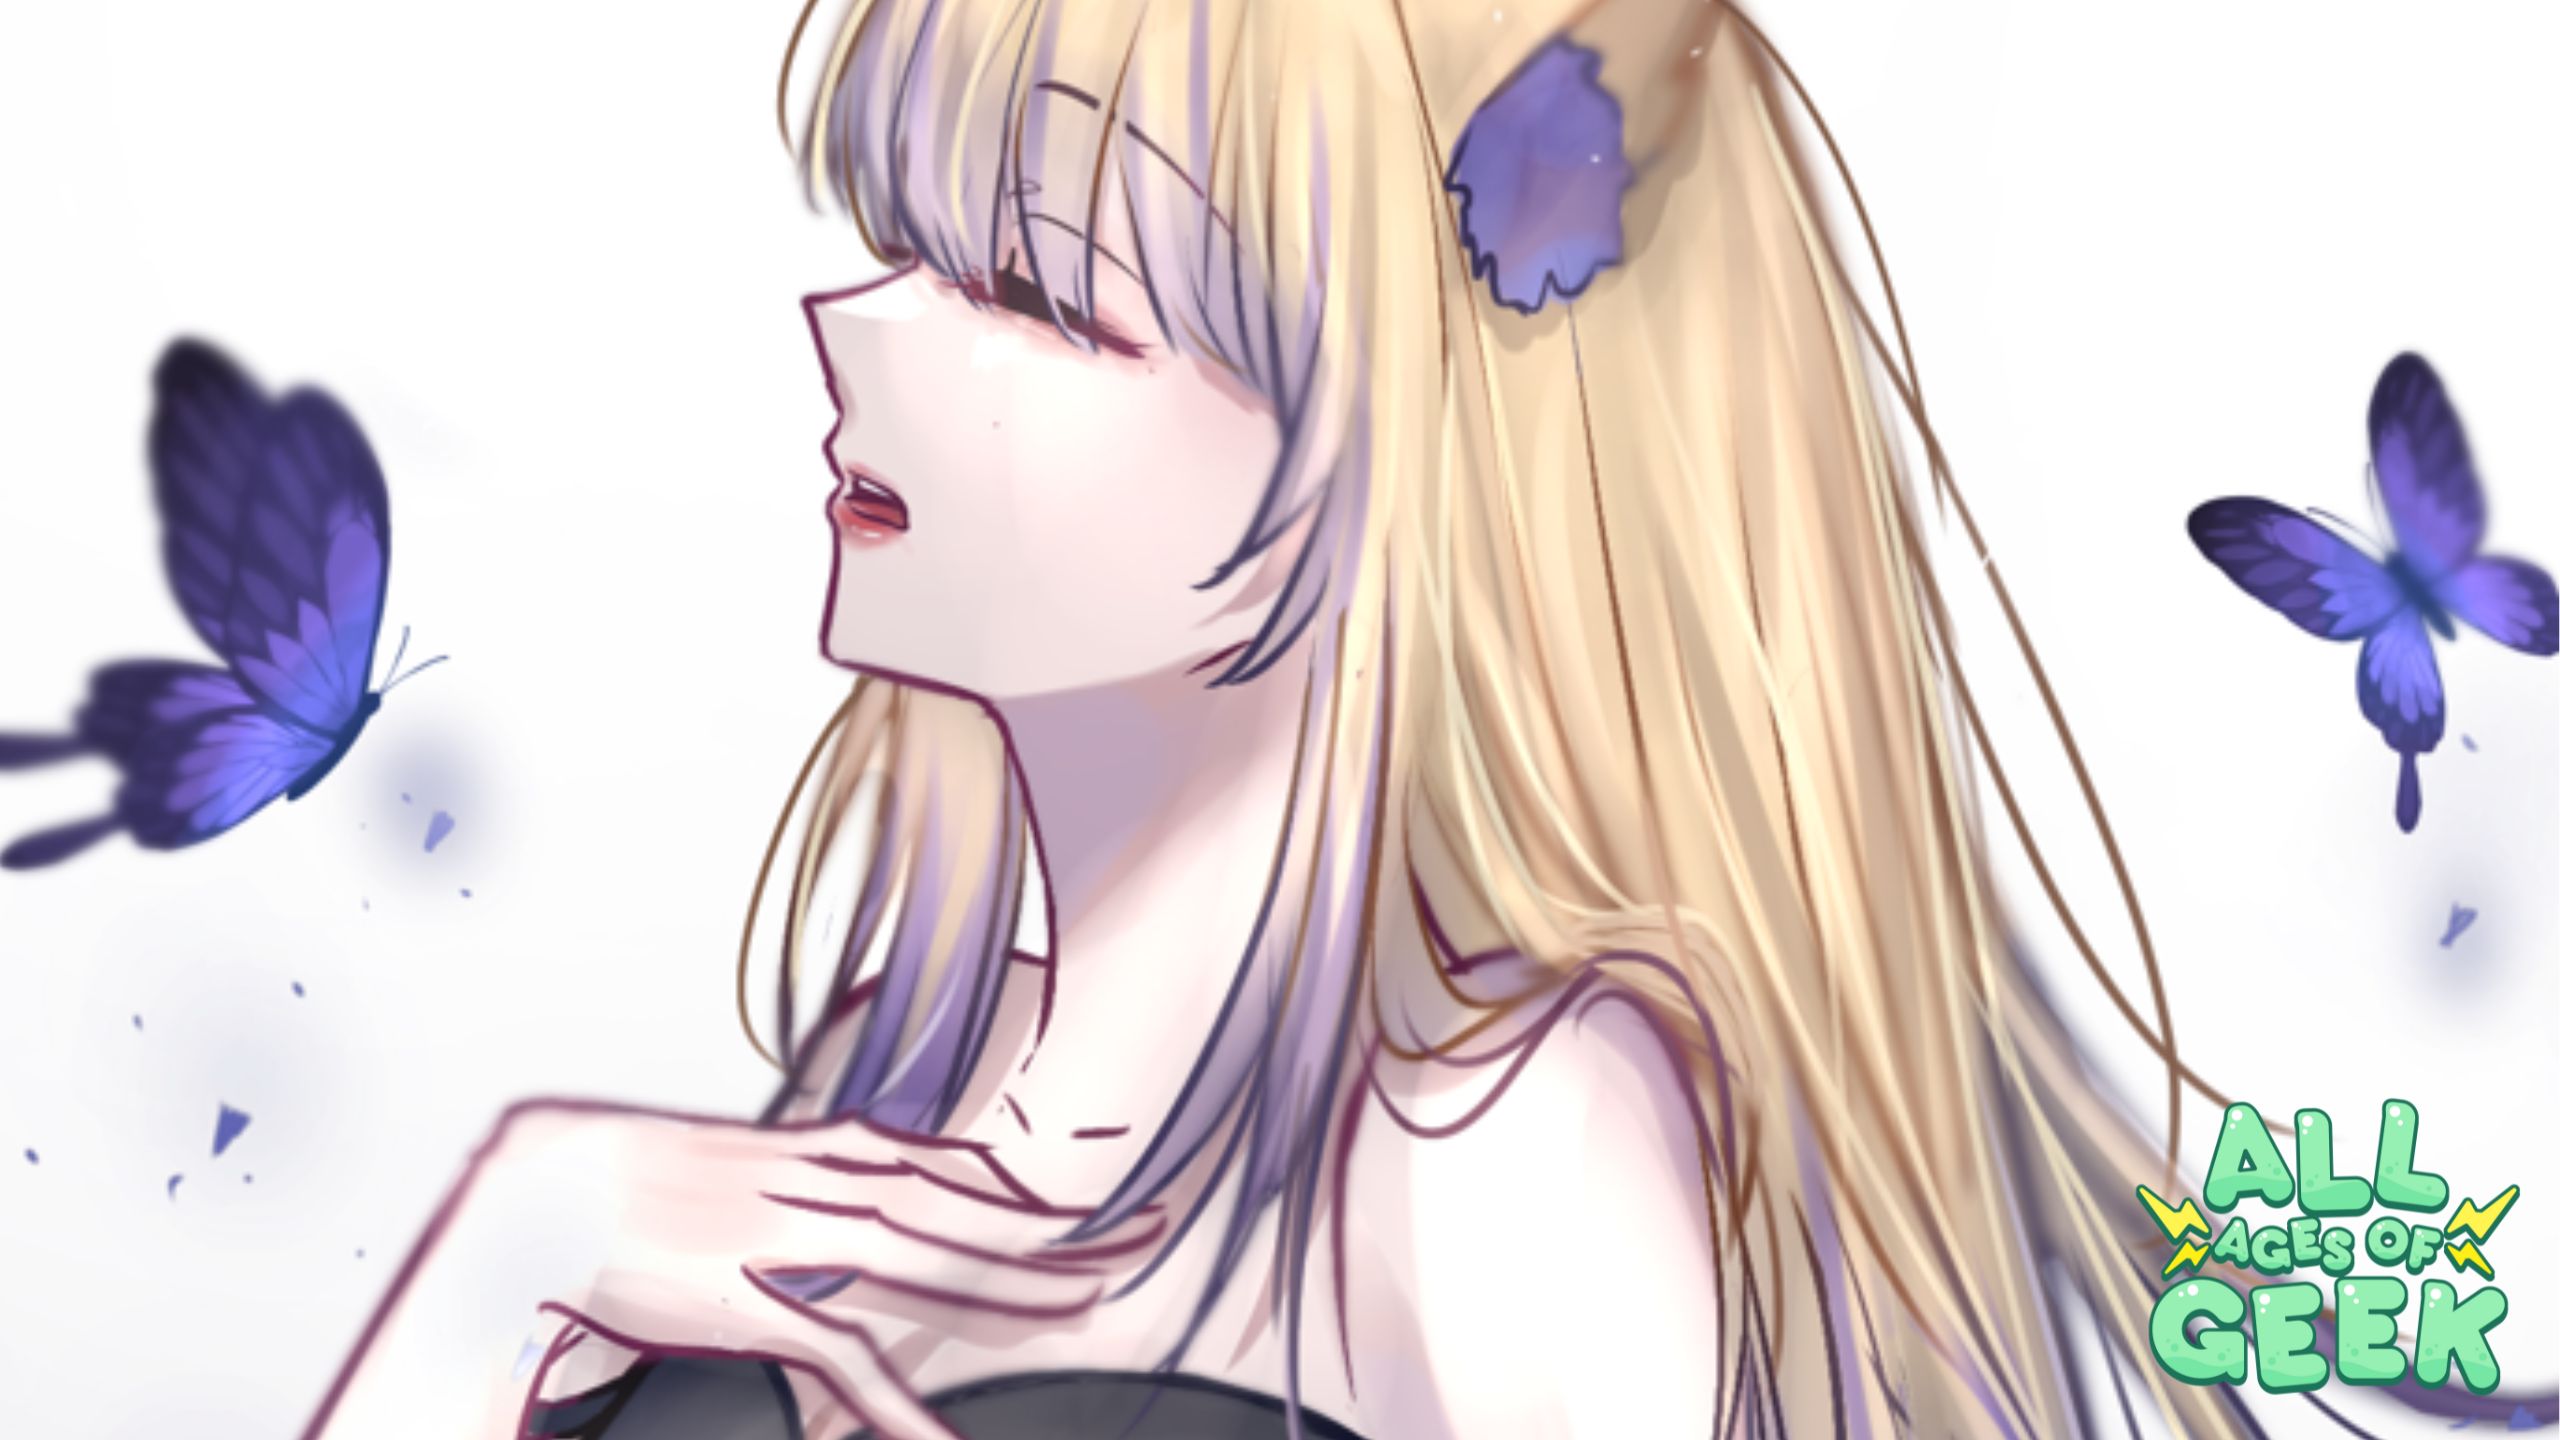 Digital artwork of a blonde anime-style girl with closed eyes and a serene expression, wearing a black outfit. She has animal ears with a blue butterfly detail on one ear. Two blue butterflies are flying around her. The All Ages of Geek logo is displayed in the bottom right corner.